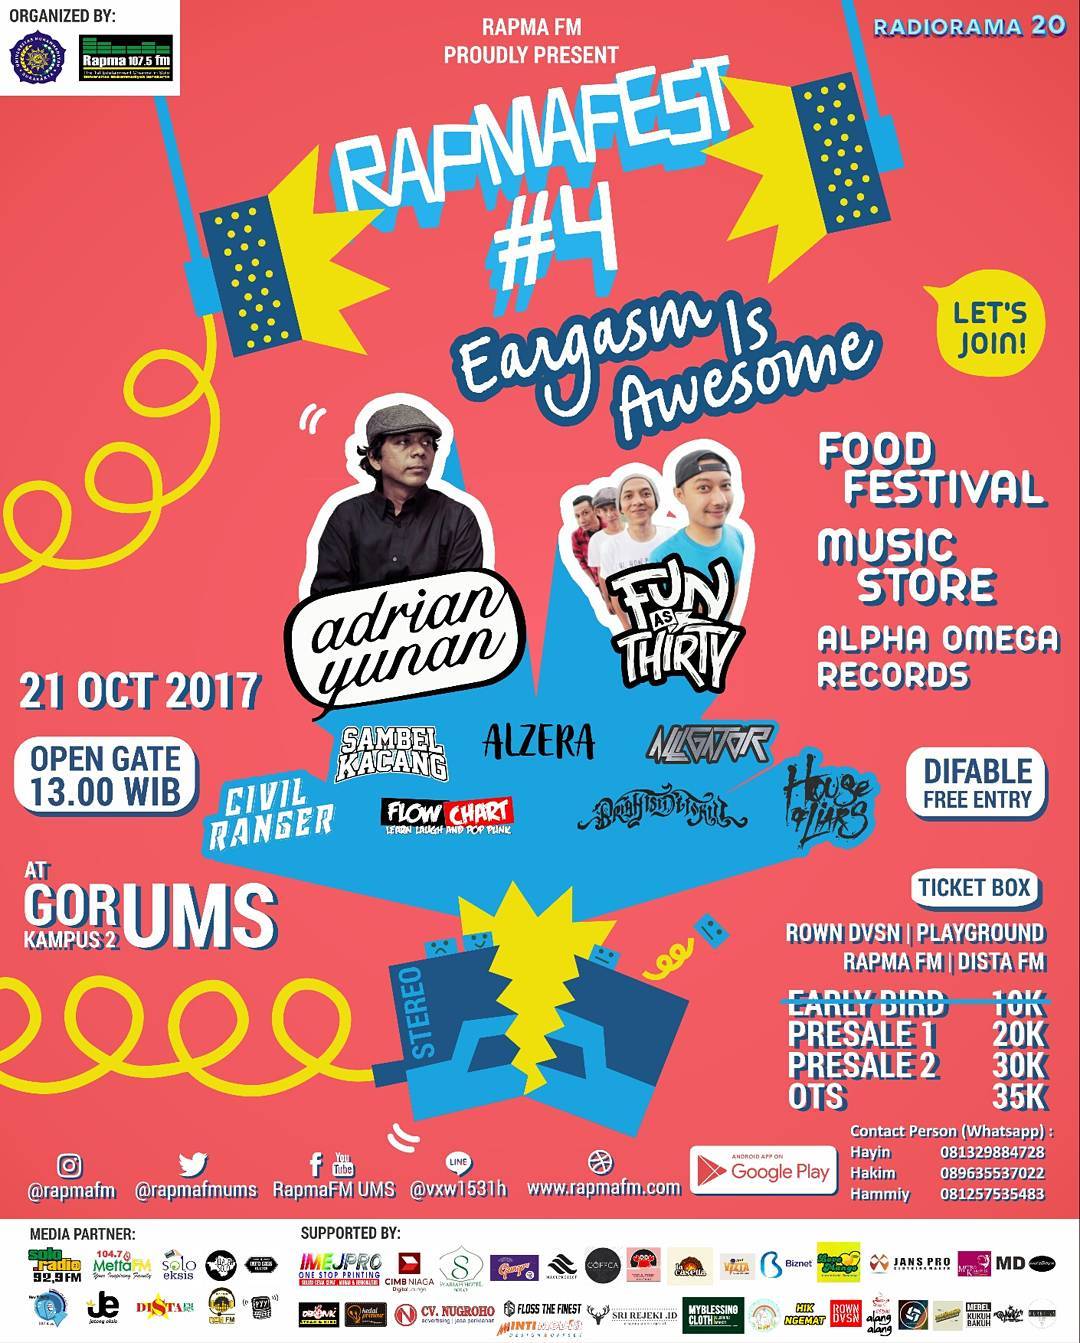 RAPMAFEST 4 EARGASM IS AWESOME